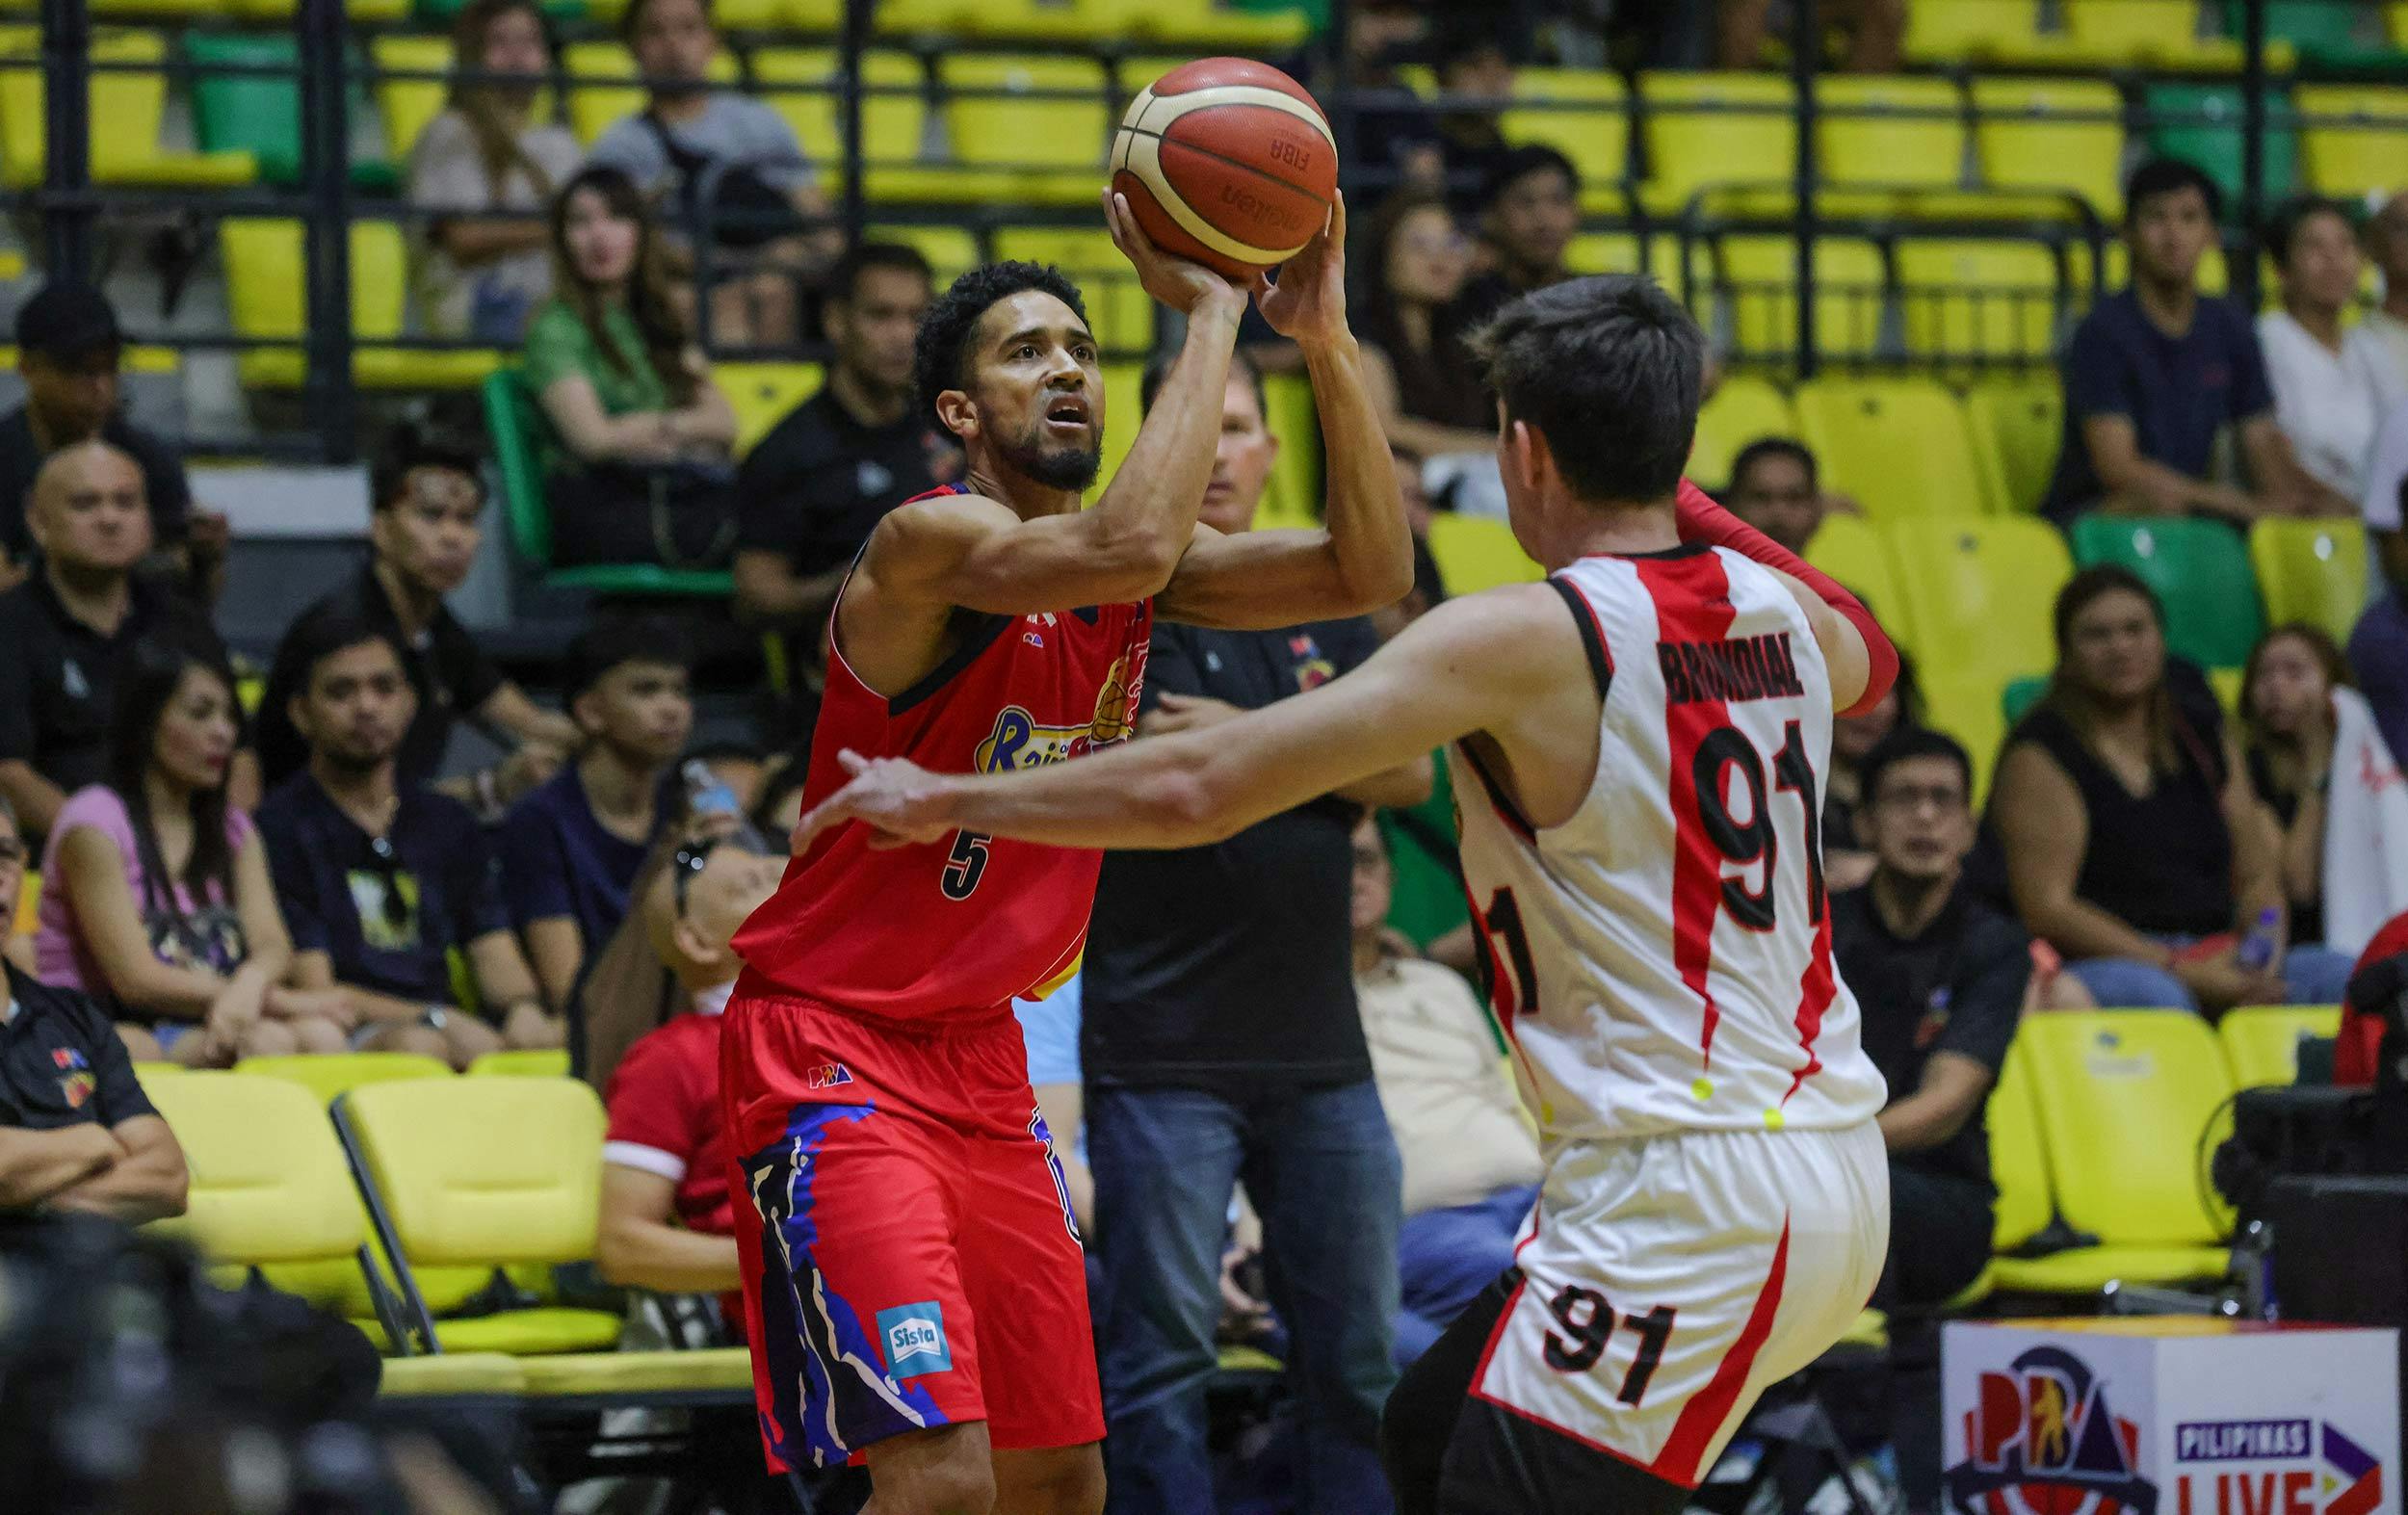 PBA: Gabe Norwood takes on new role as playing assistant coach of Rain or Shine